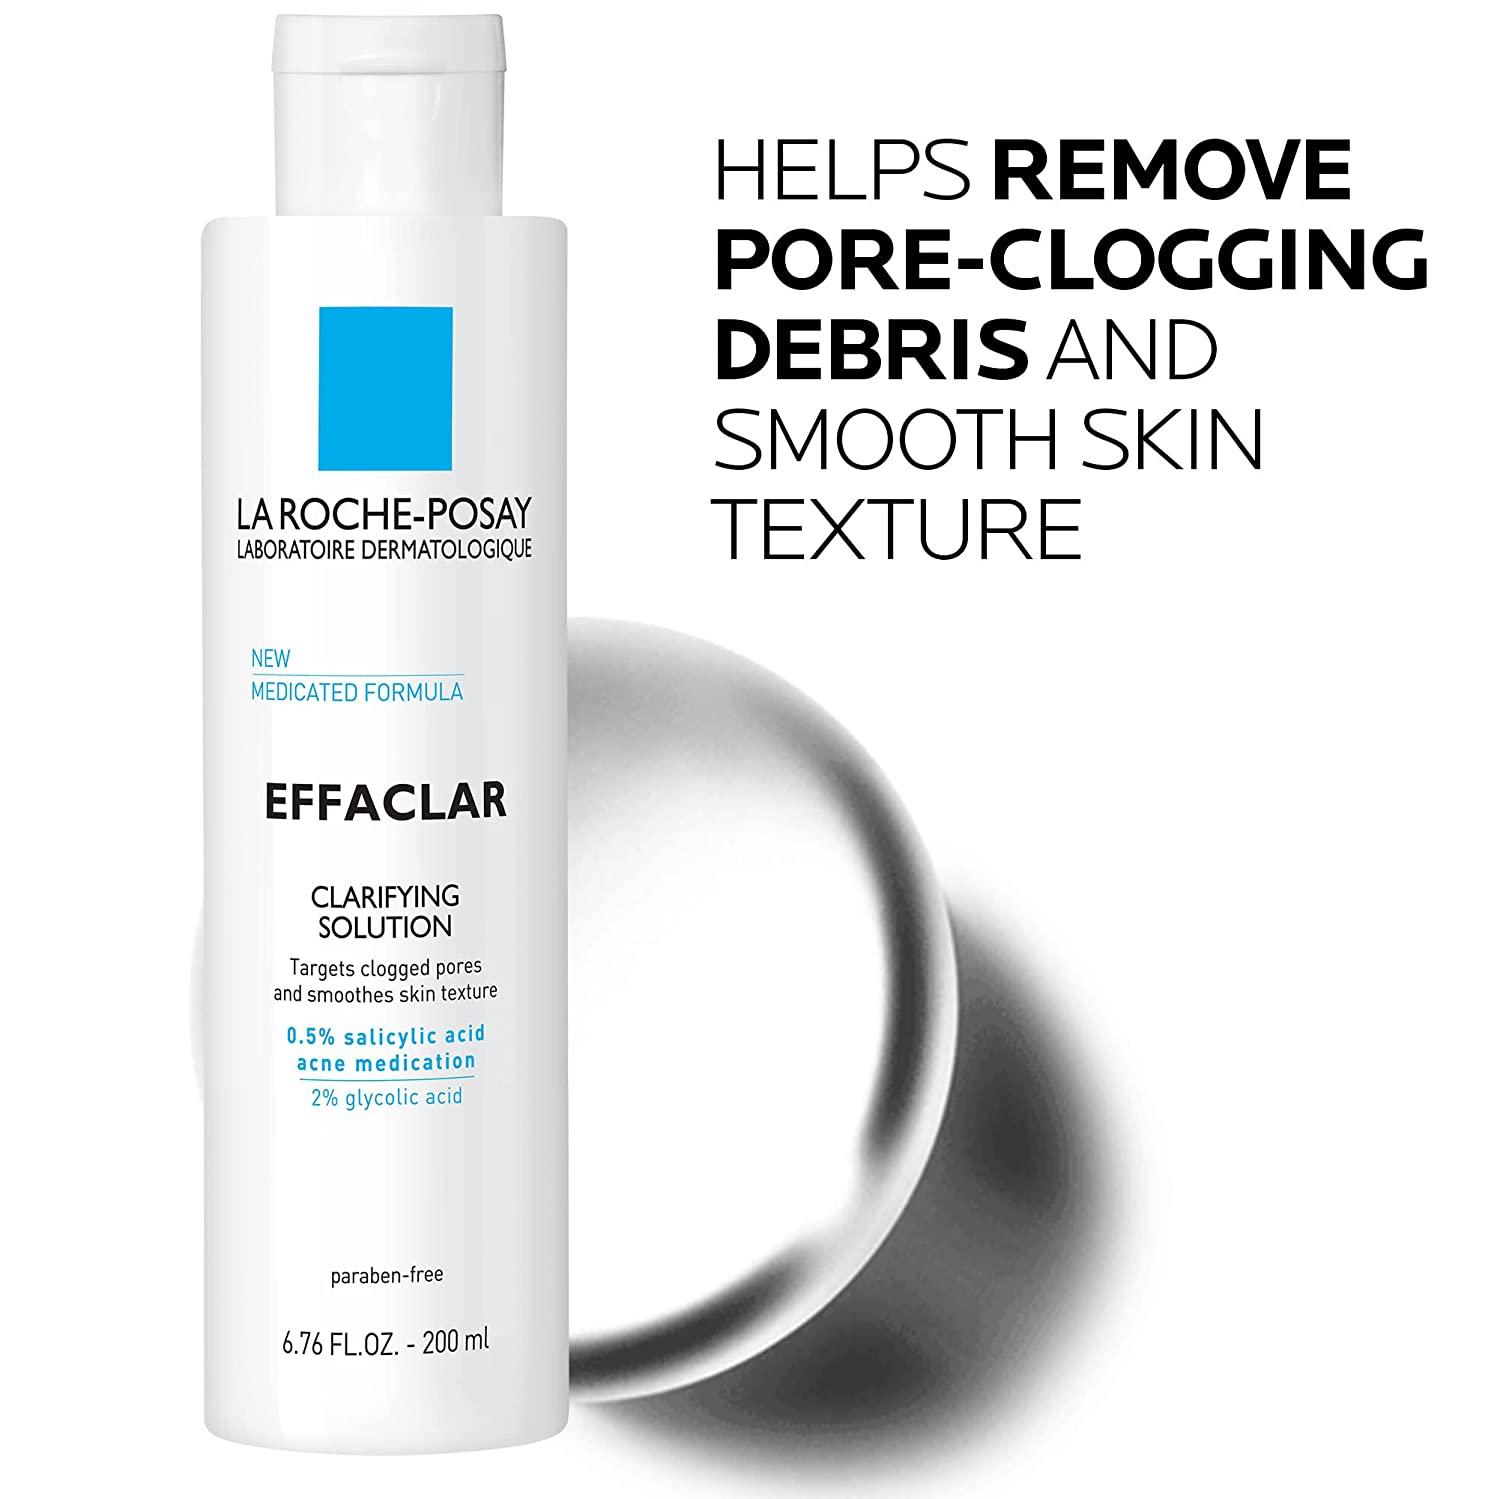 La Roche-Posay Effaclar Clarifying Solution Acne Toner with Acid and Acid, Pore Refining Oily Skin Toner, Gentle Exfoliant to Unclog Pores and Remove Dead Skin Cells